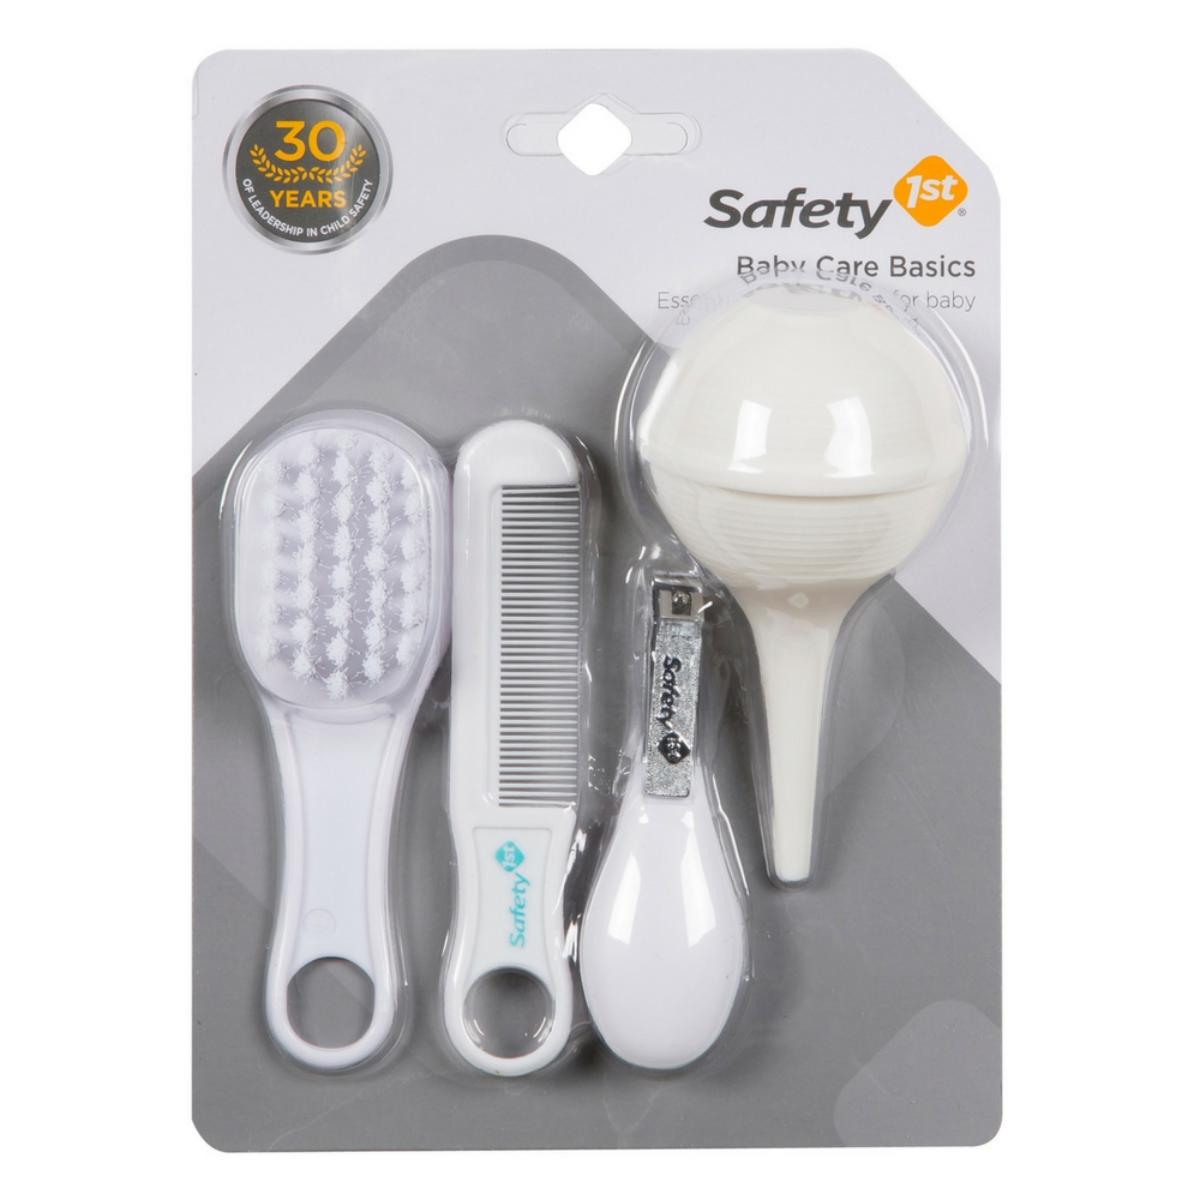 Safety First Baby Care Basics Set 4 Pack - 143343